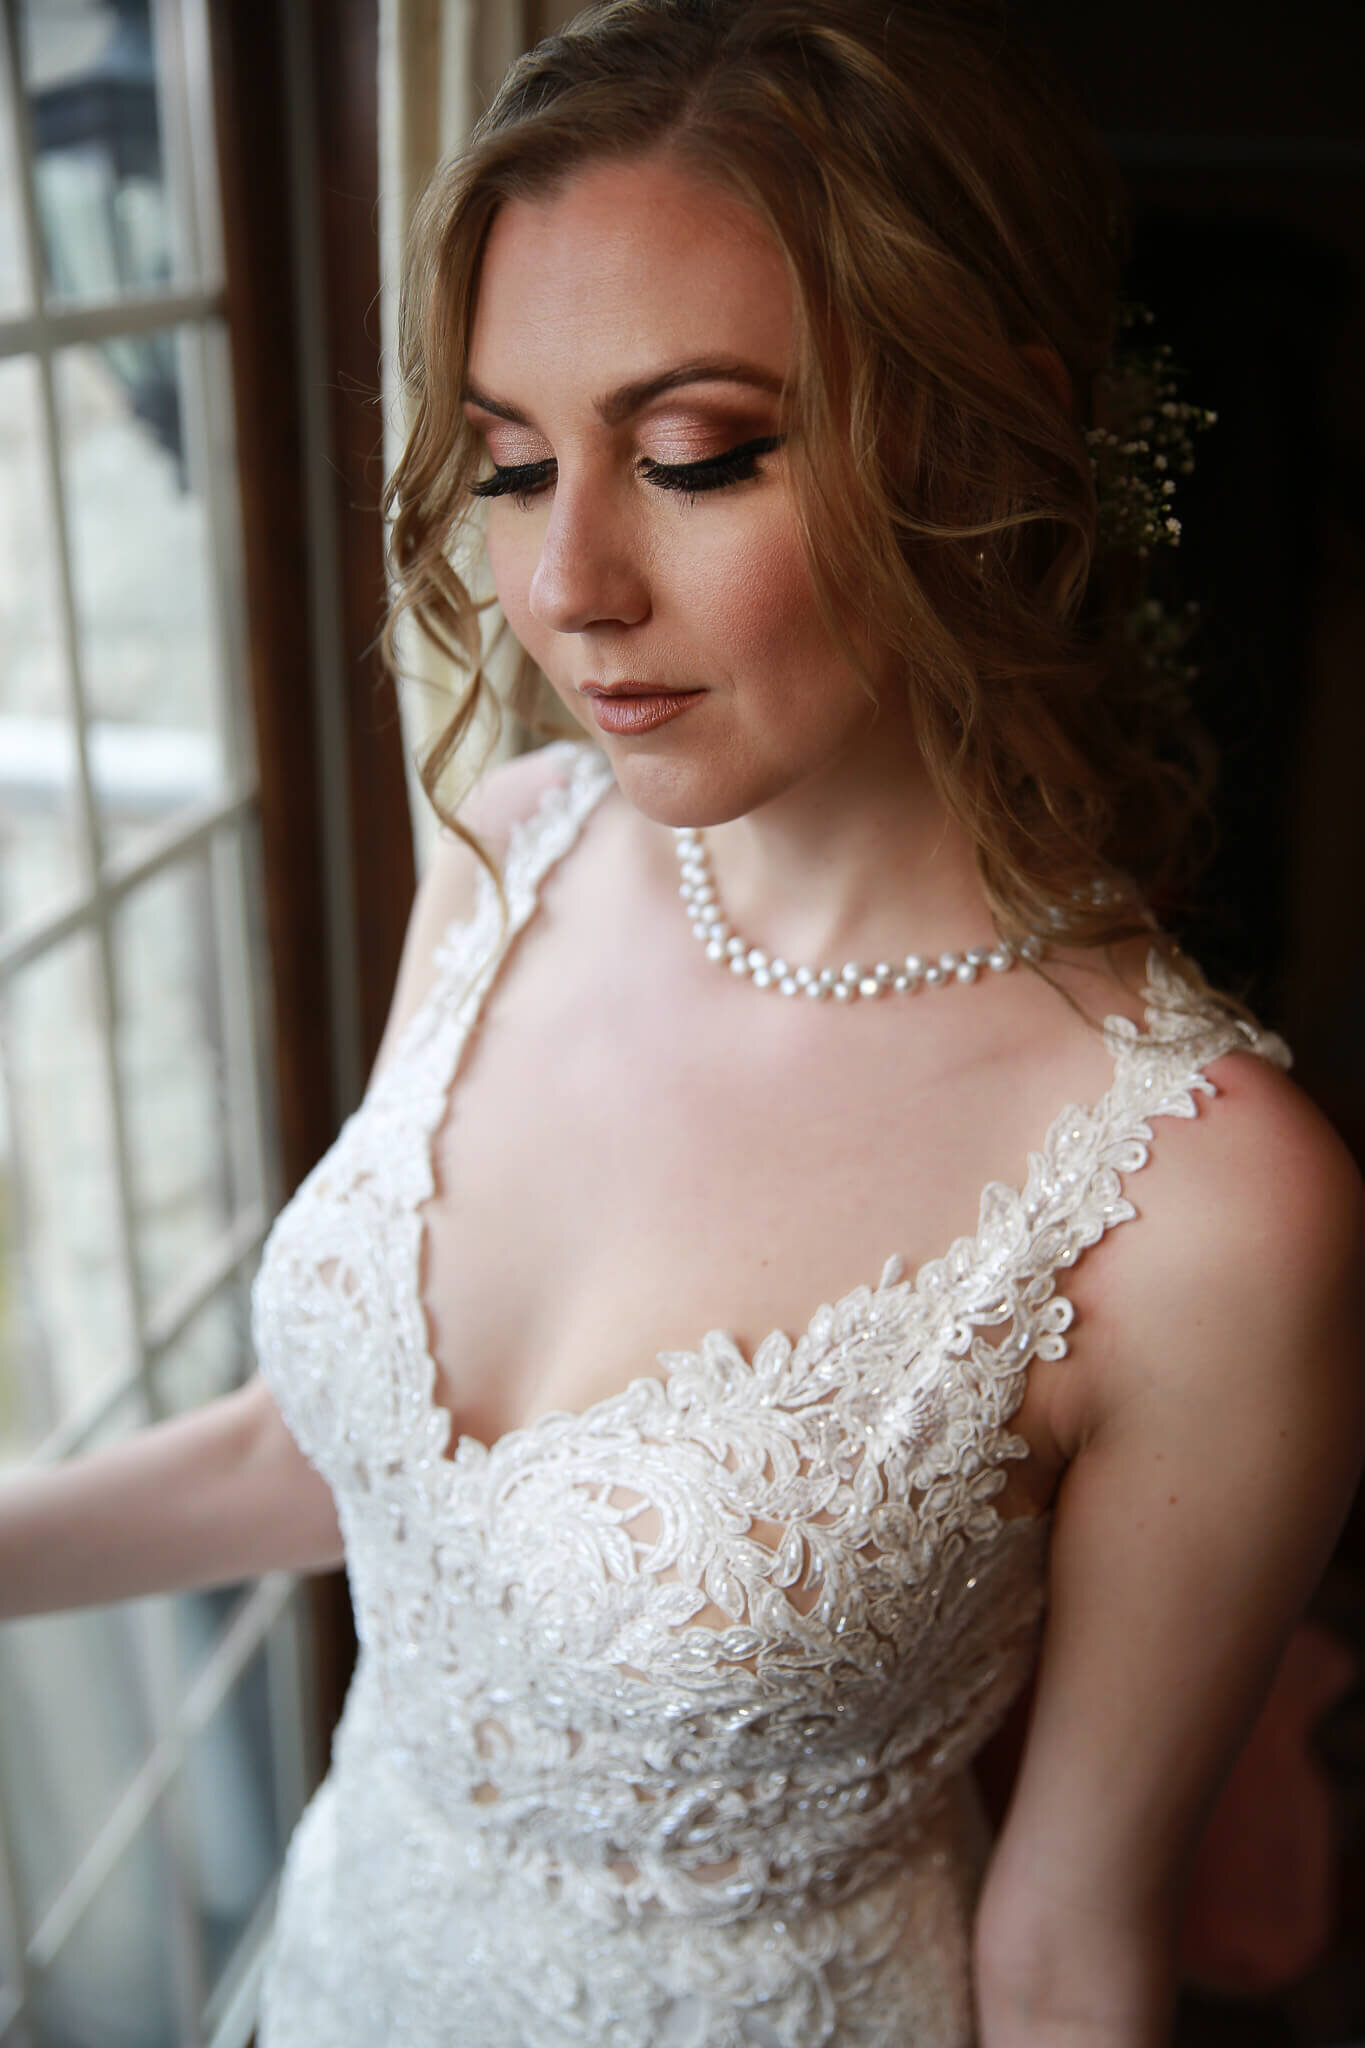 Bride portrait looking down. She is wearing classic jewellery and bridal makeup.